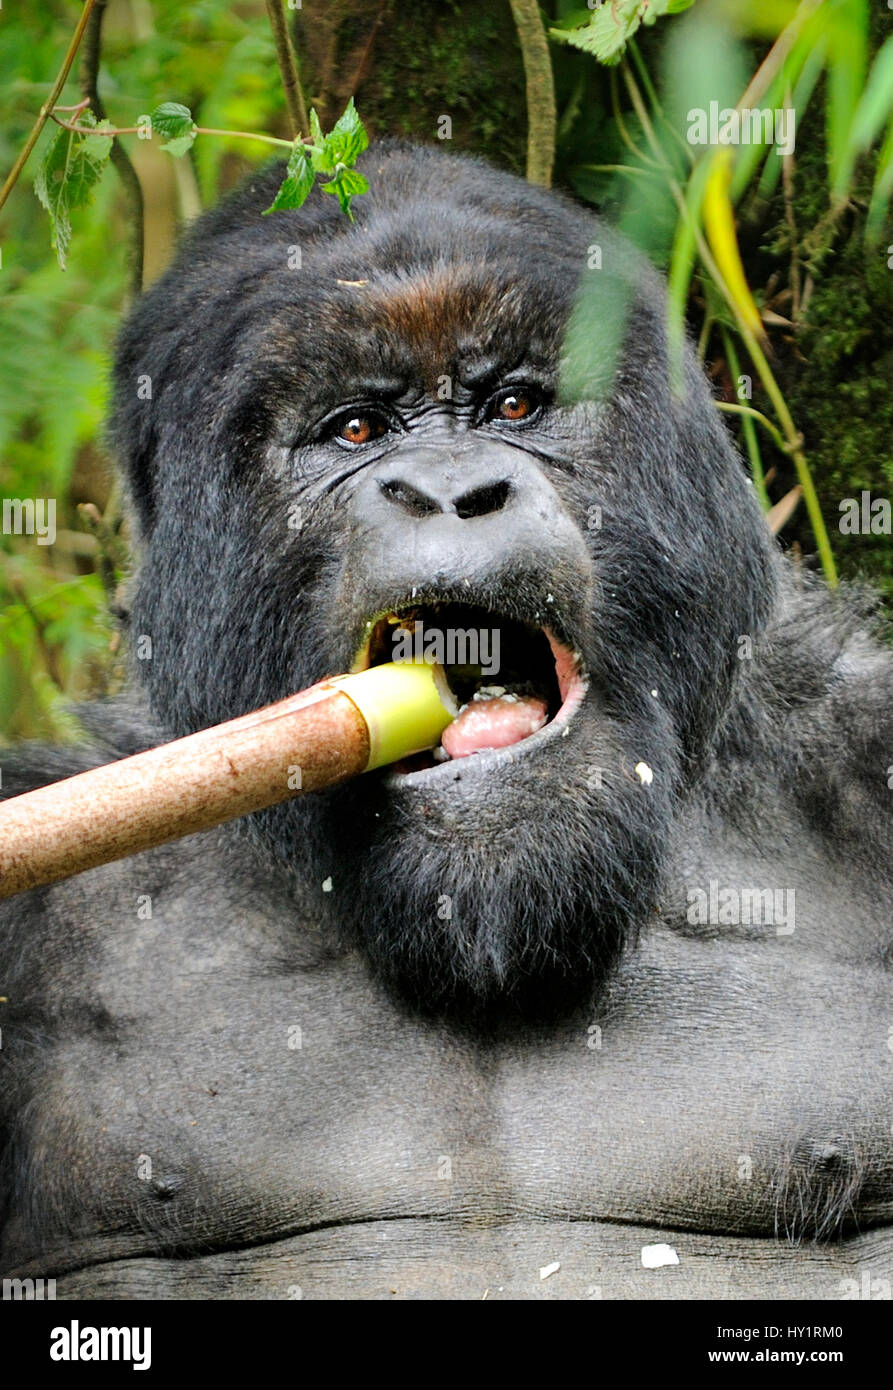 Mountain gorilla (Gorilla beringei beringei) silverback male feeding on  bamboo shoots, Volcanoes National Park, Virunga mountains, Rwanda. Note - if gorillas eat an excess of bamboo shoots they can become intoxicated. Endangered species. Stock Photo